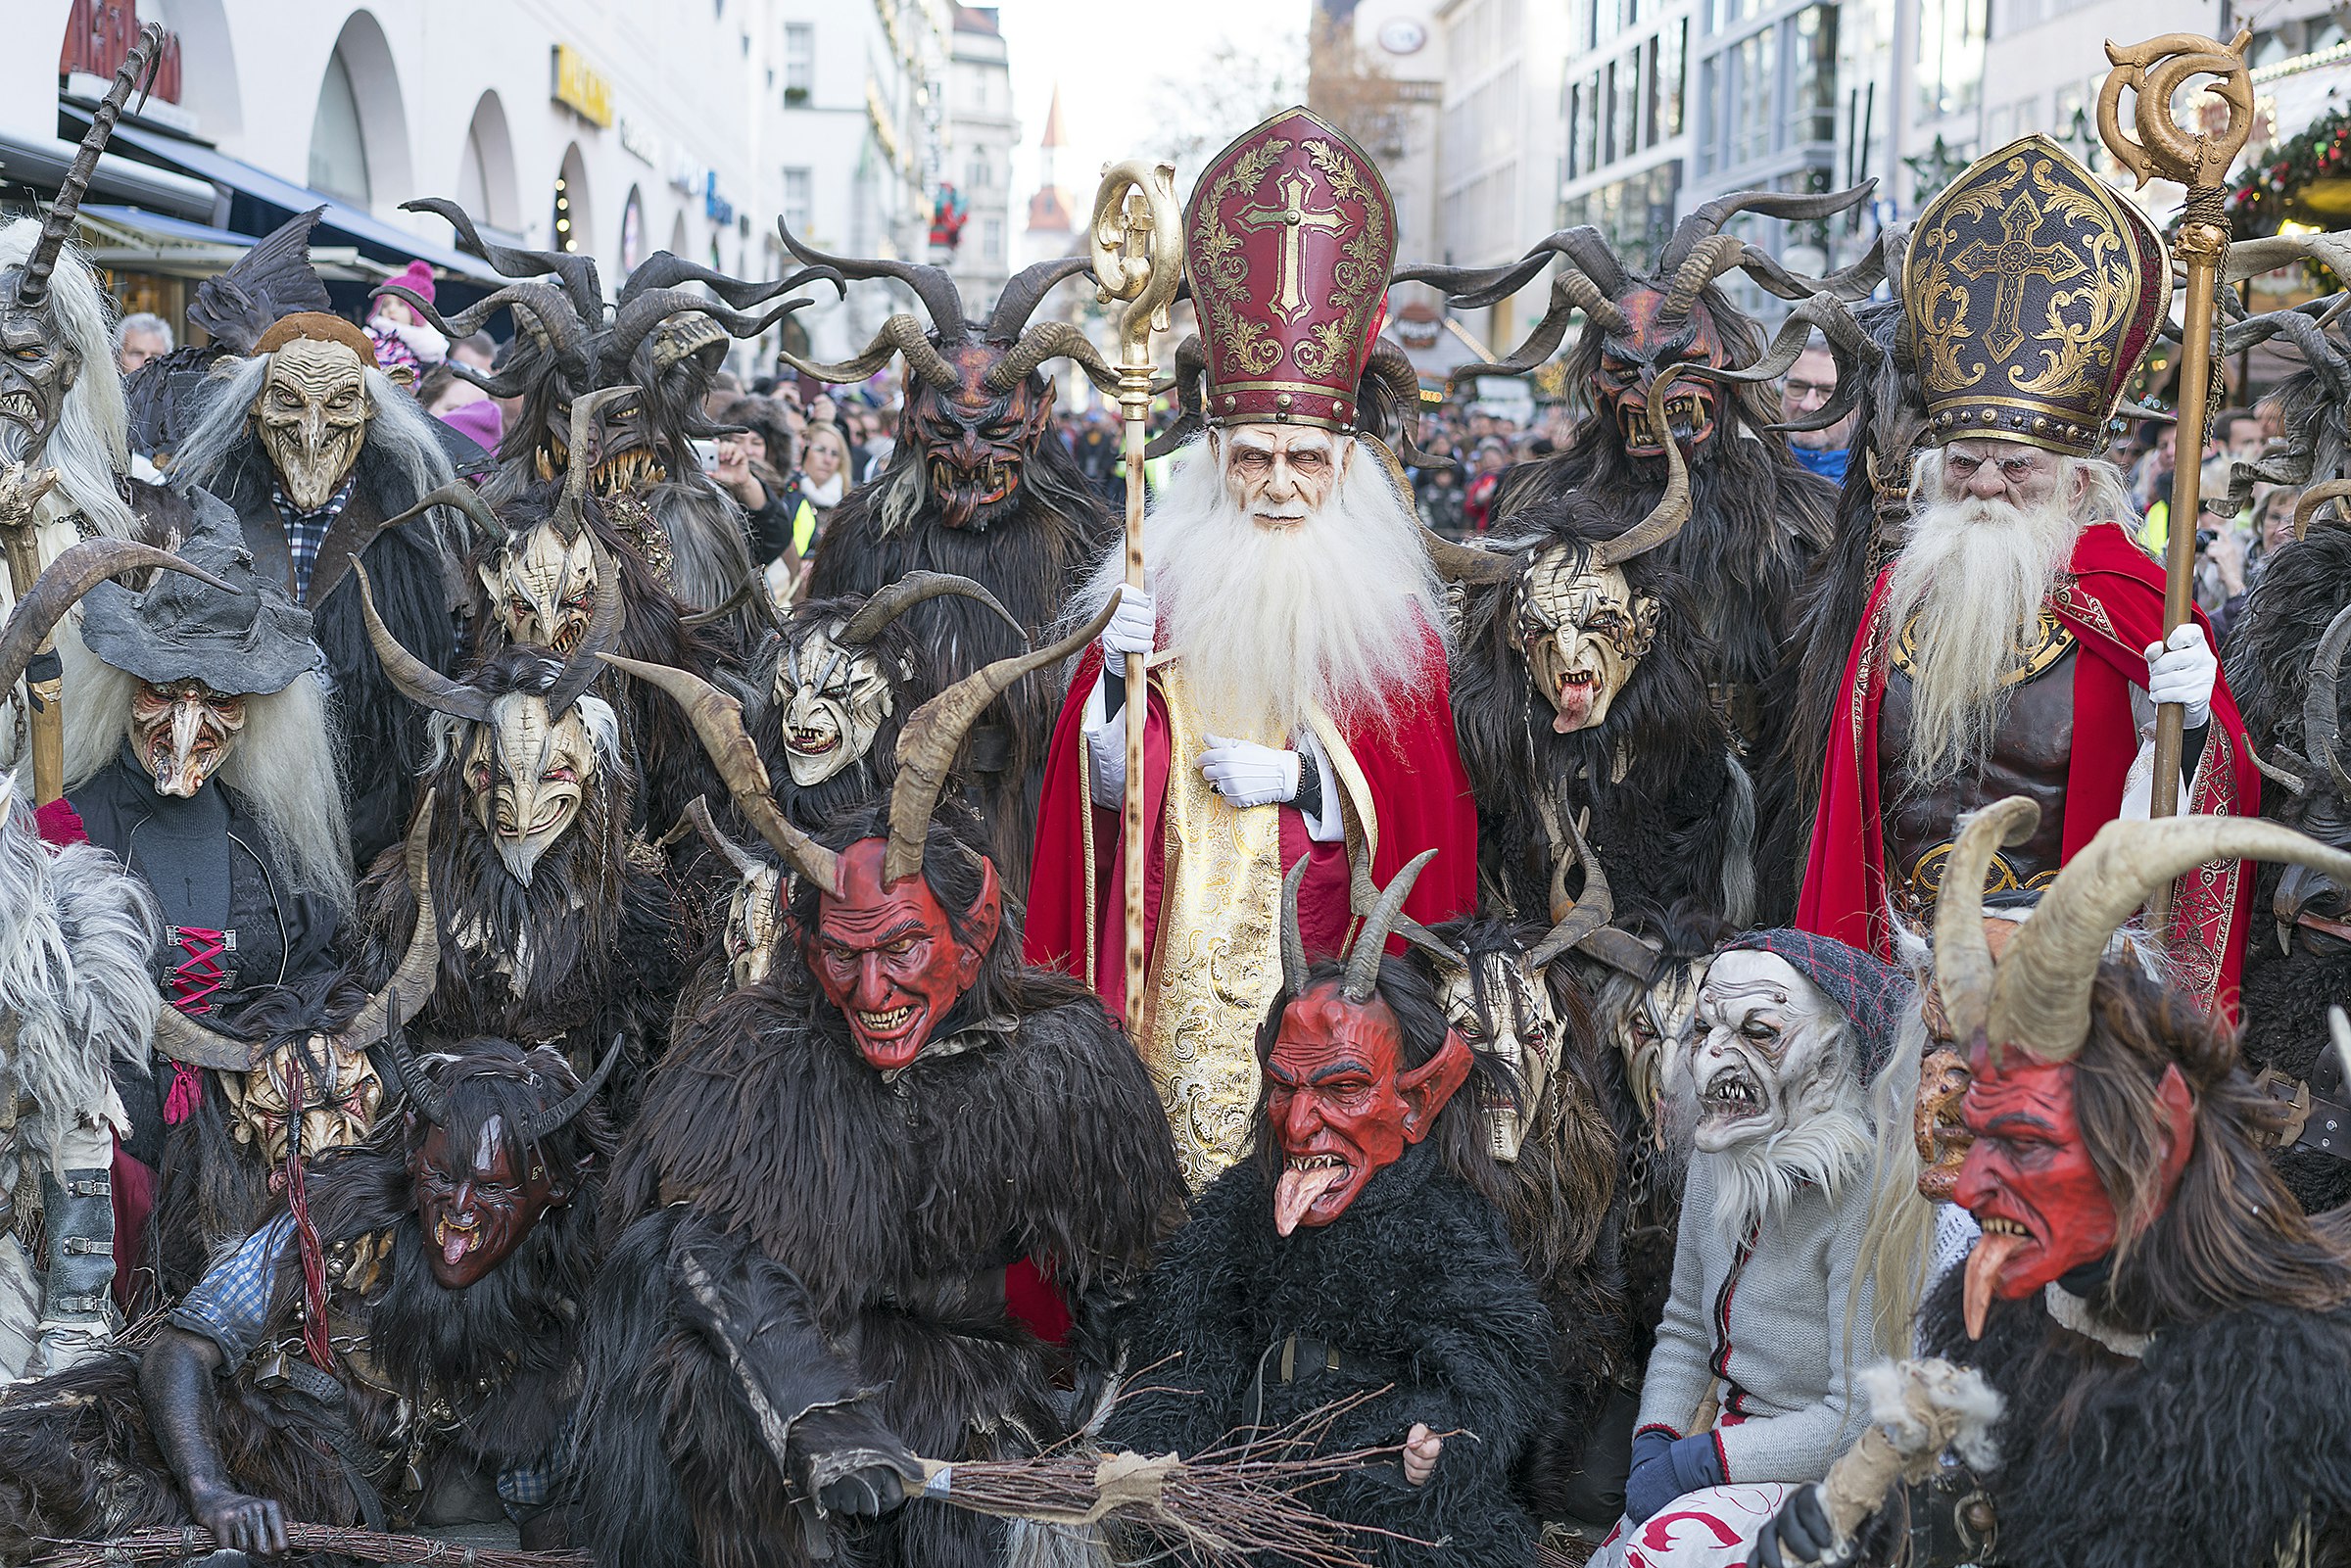 A group of people dressed in different styles of Krampus costumes pose for the camera on a Munich street.